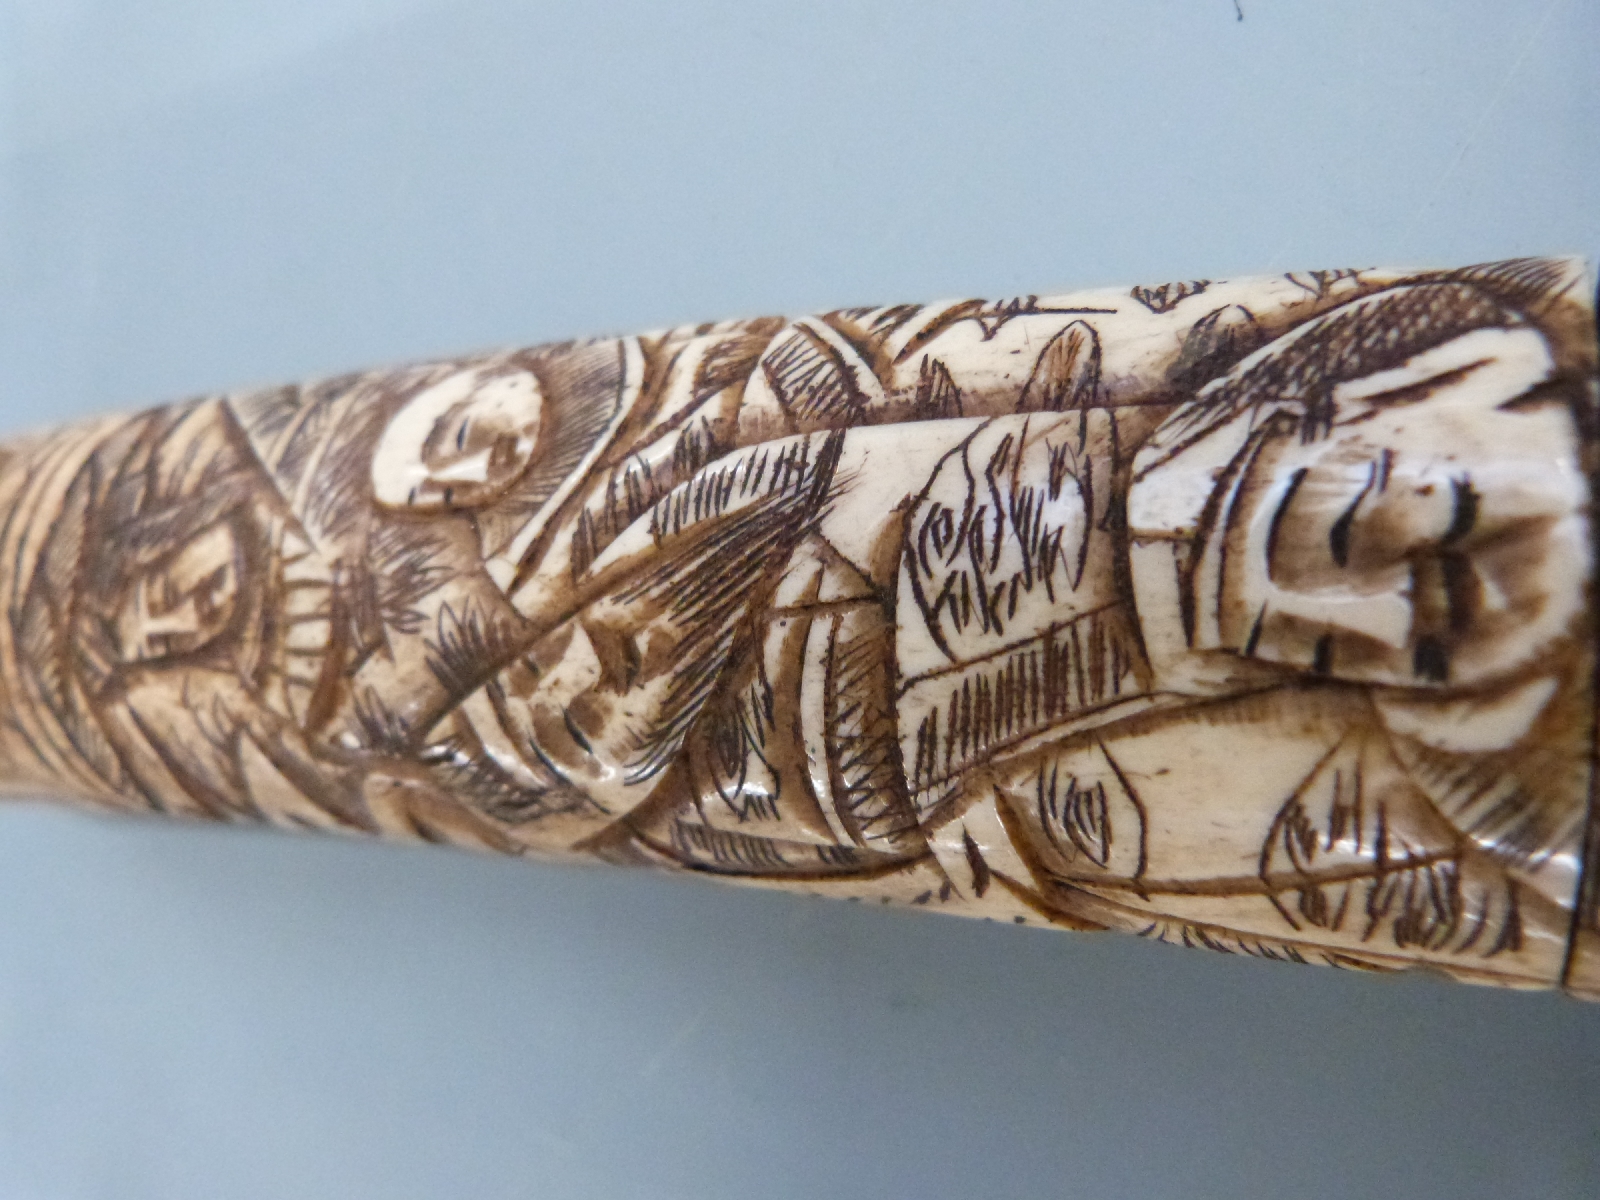 Japanese Tanto dagger with sectional carved bone handle and scabbard depicting figures, blade length - Image 5 of 5